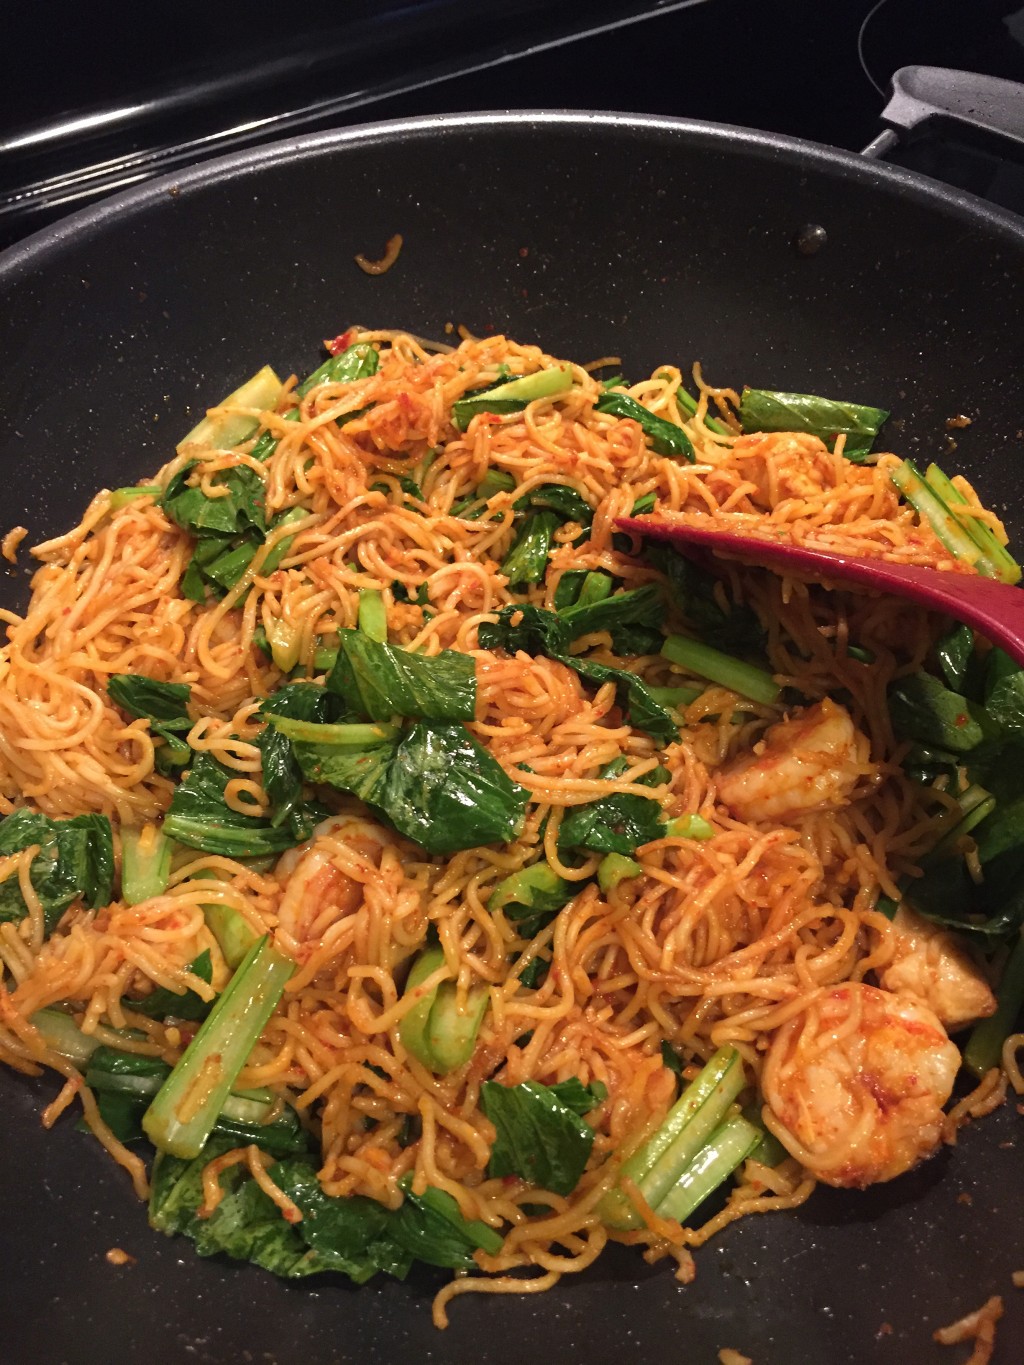 How to Make Malaysian-Style Spicy Fried Noodles (Mie Goreng) | Delishably